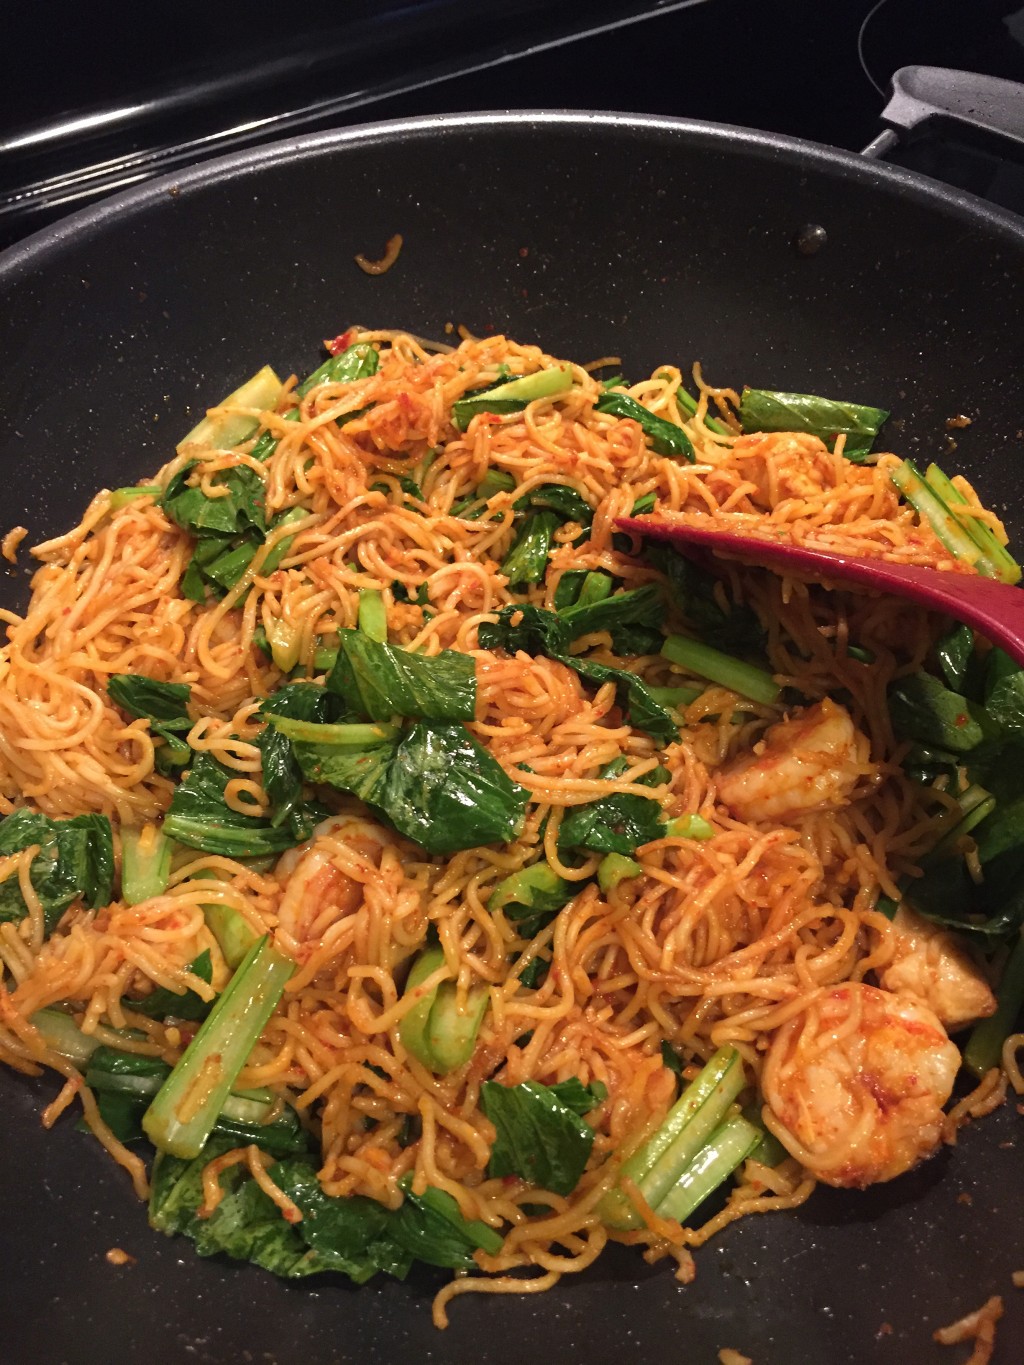 How to Make Malaysian-Style Spicy Fried Noodles (Mie Goreng) | Delishably